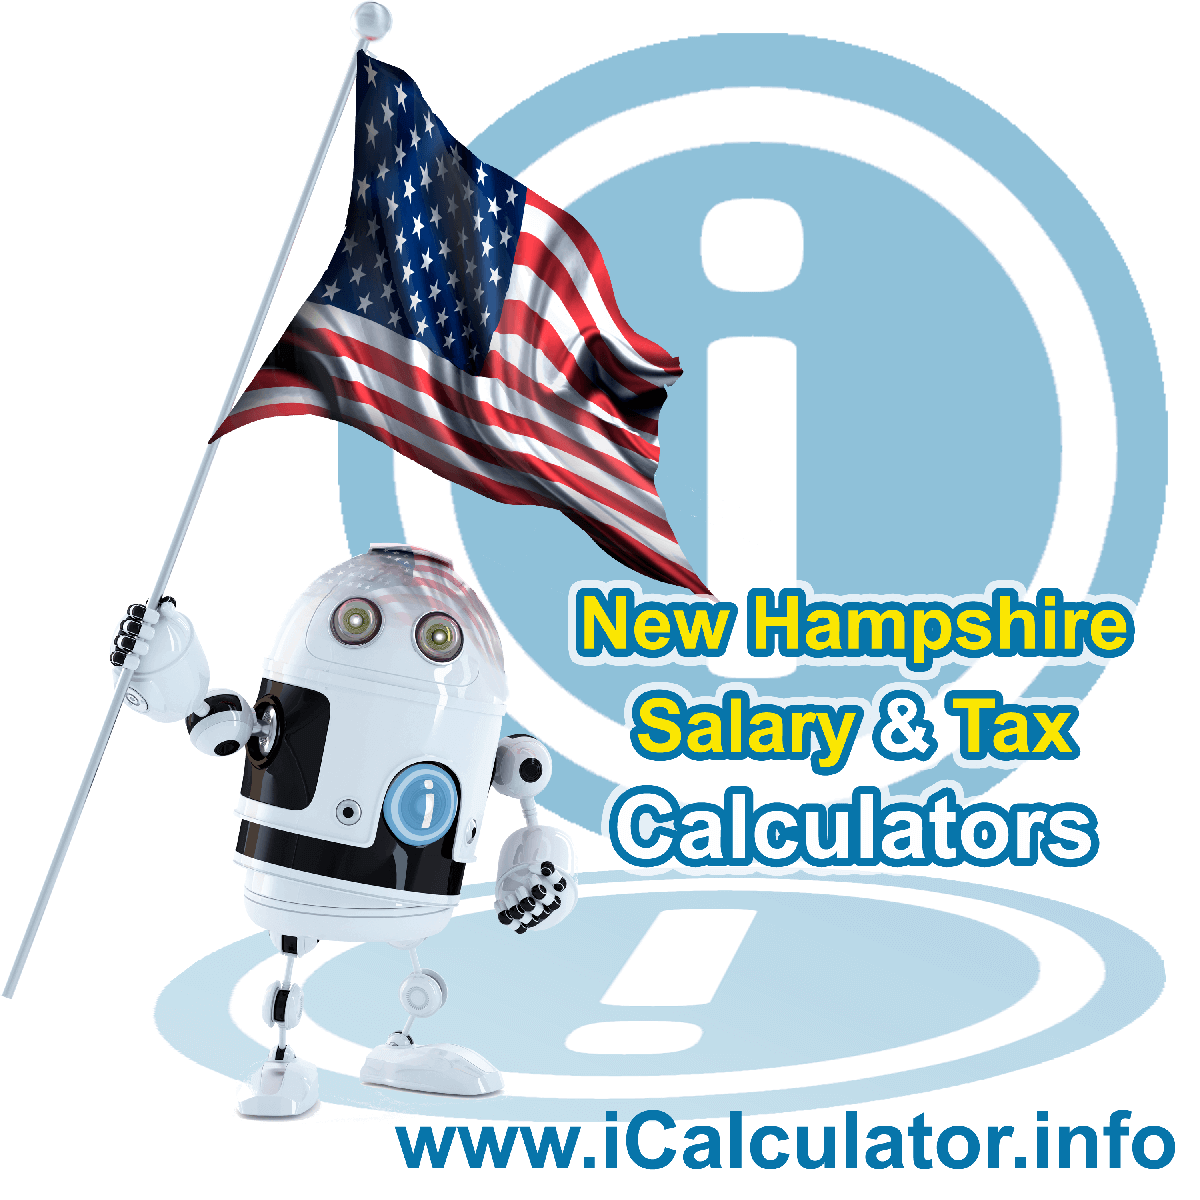 New Hampshire Salary After Tax Calculator 2023 | iCalculator™ | The New Hampshire Salary Calculator, updated for 2023, allows you to quickly calculate your take home pay after tax commitments including New Hampshire State Tax, Federal State Tax, Medicare Deductions, Social Security with New Hampshire state tax tables 